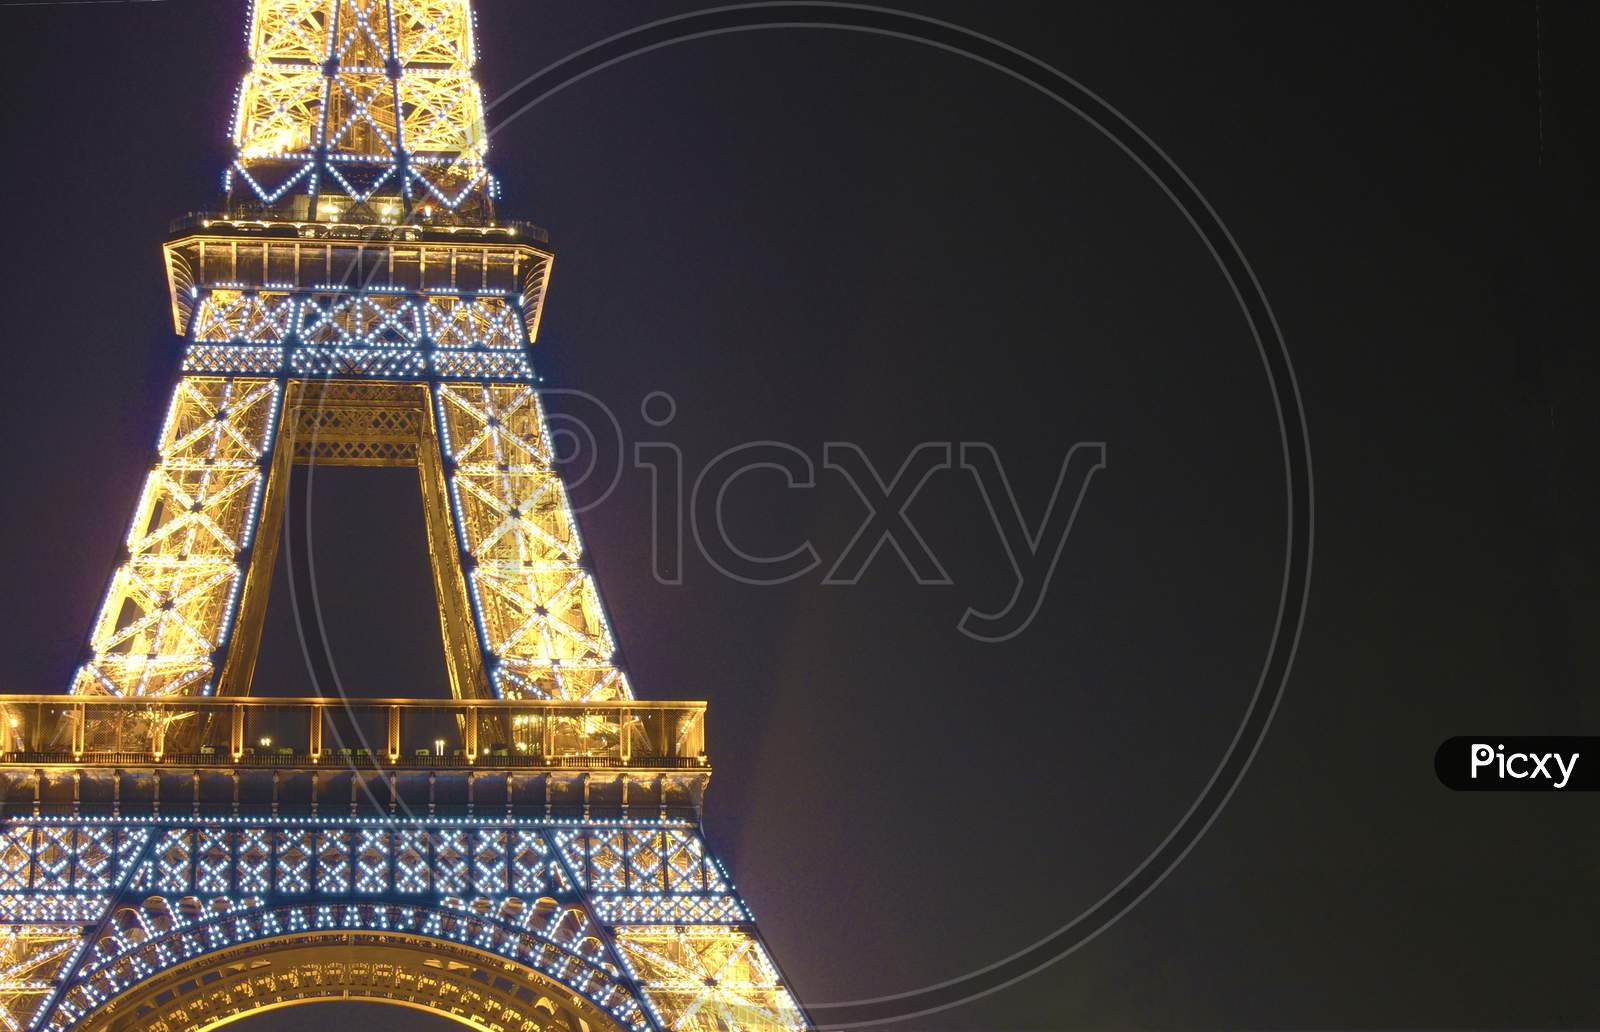 The Eiffel Tower Image